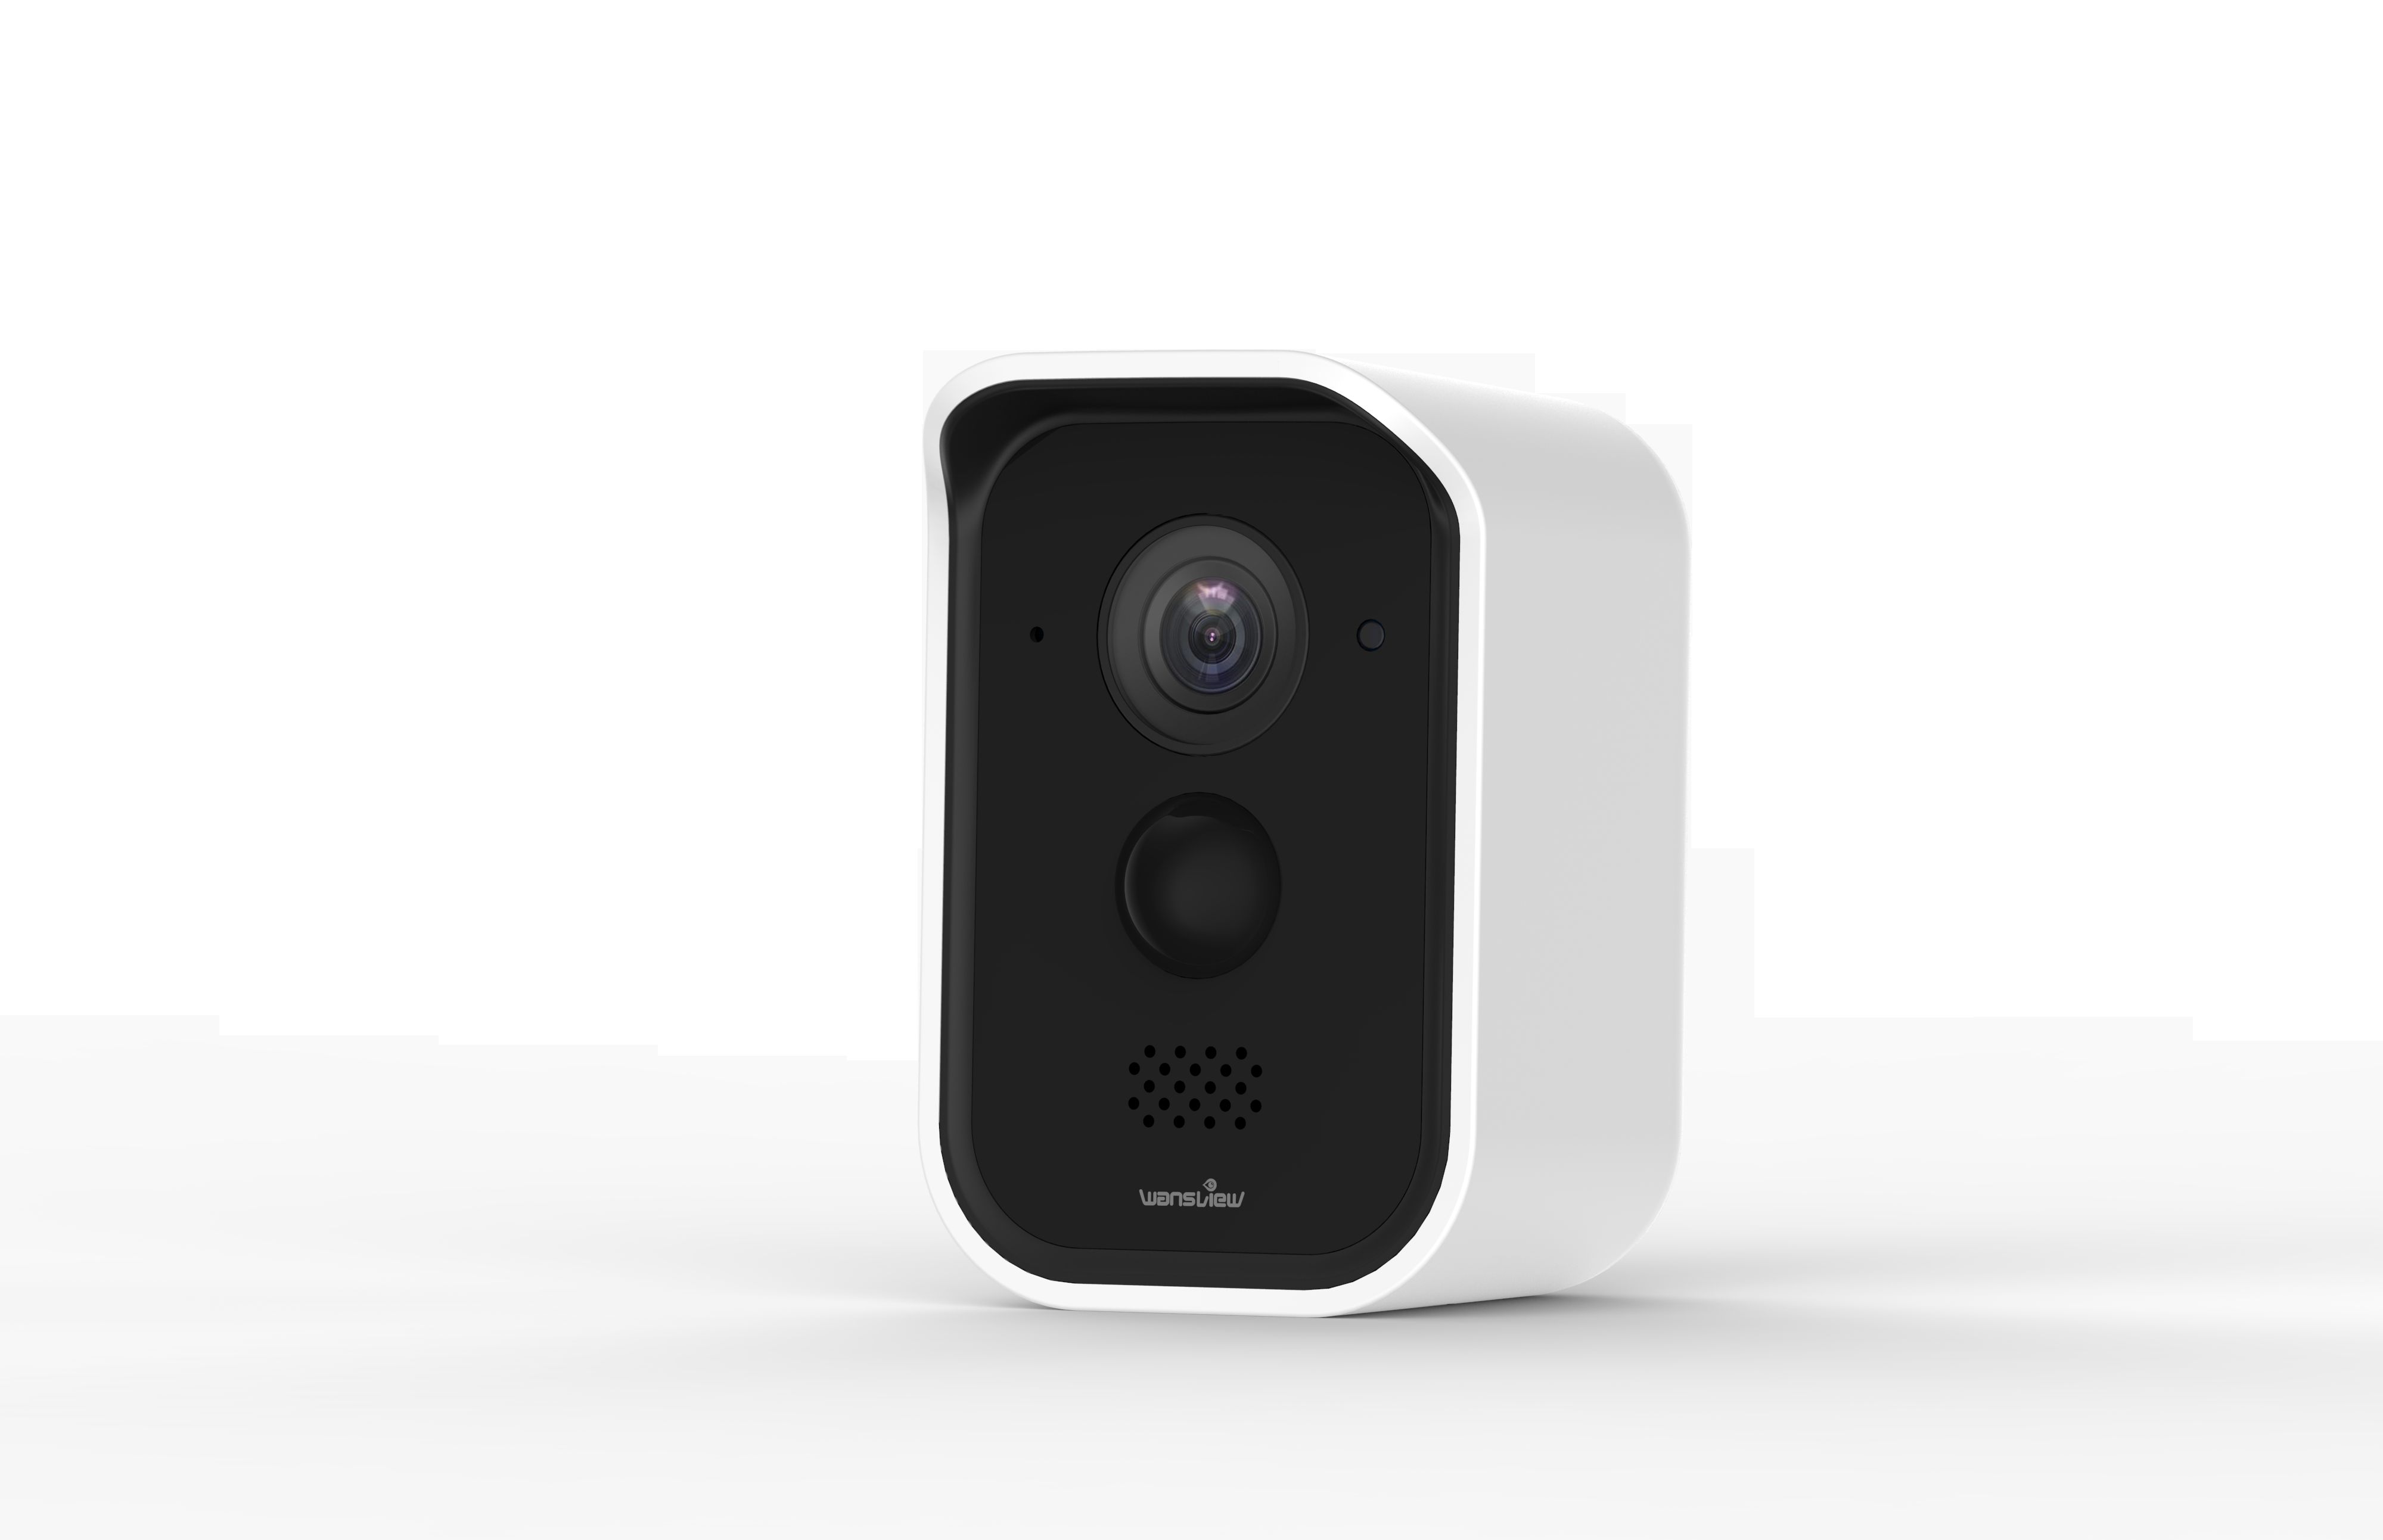 Is the wireless surveillance camera connected to a power sup